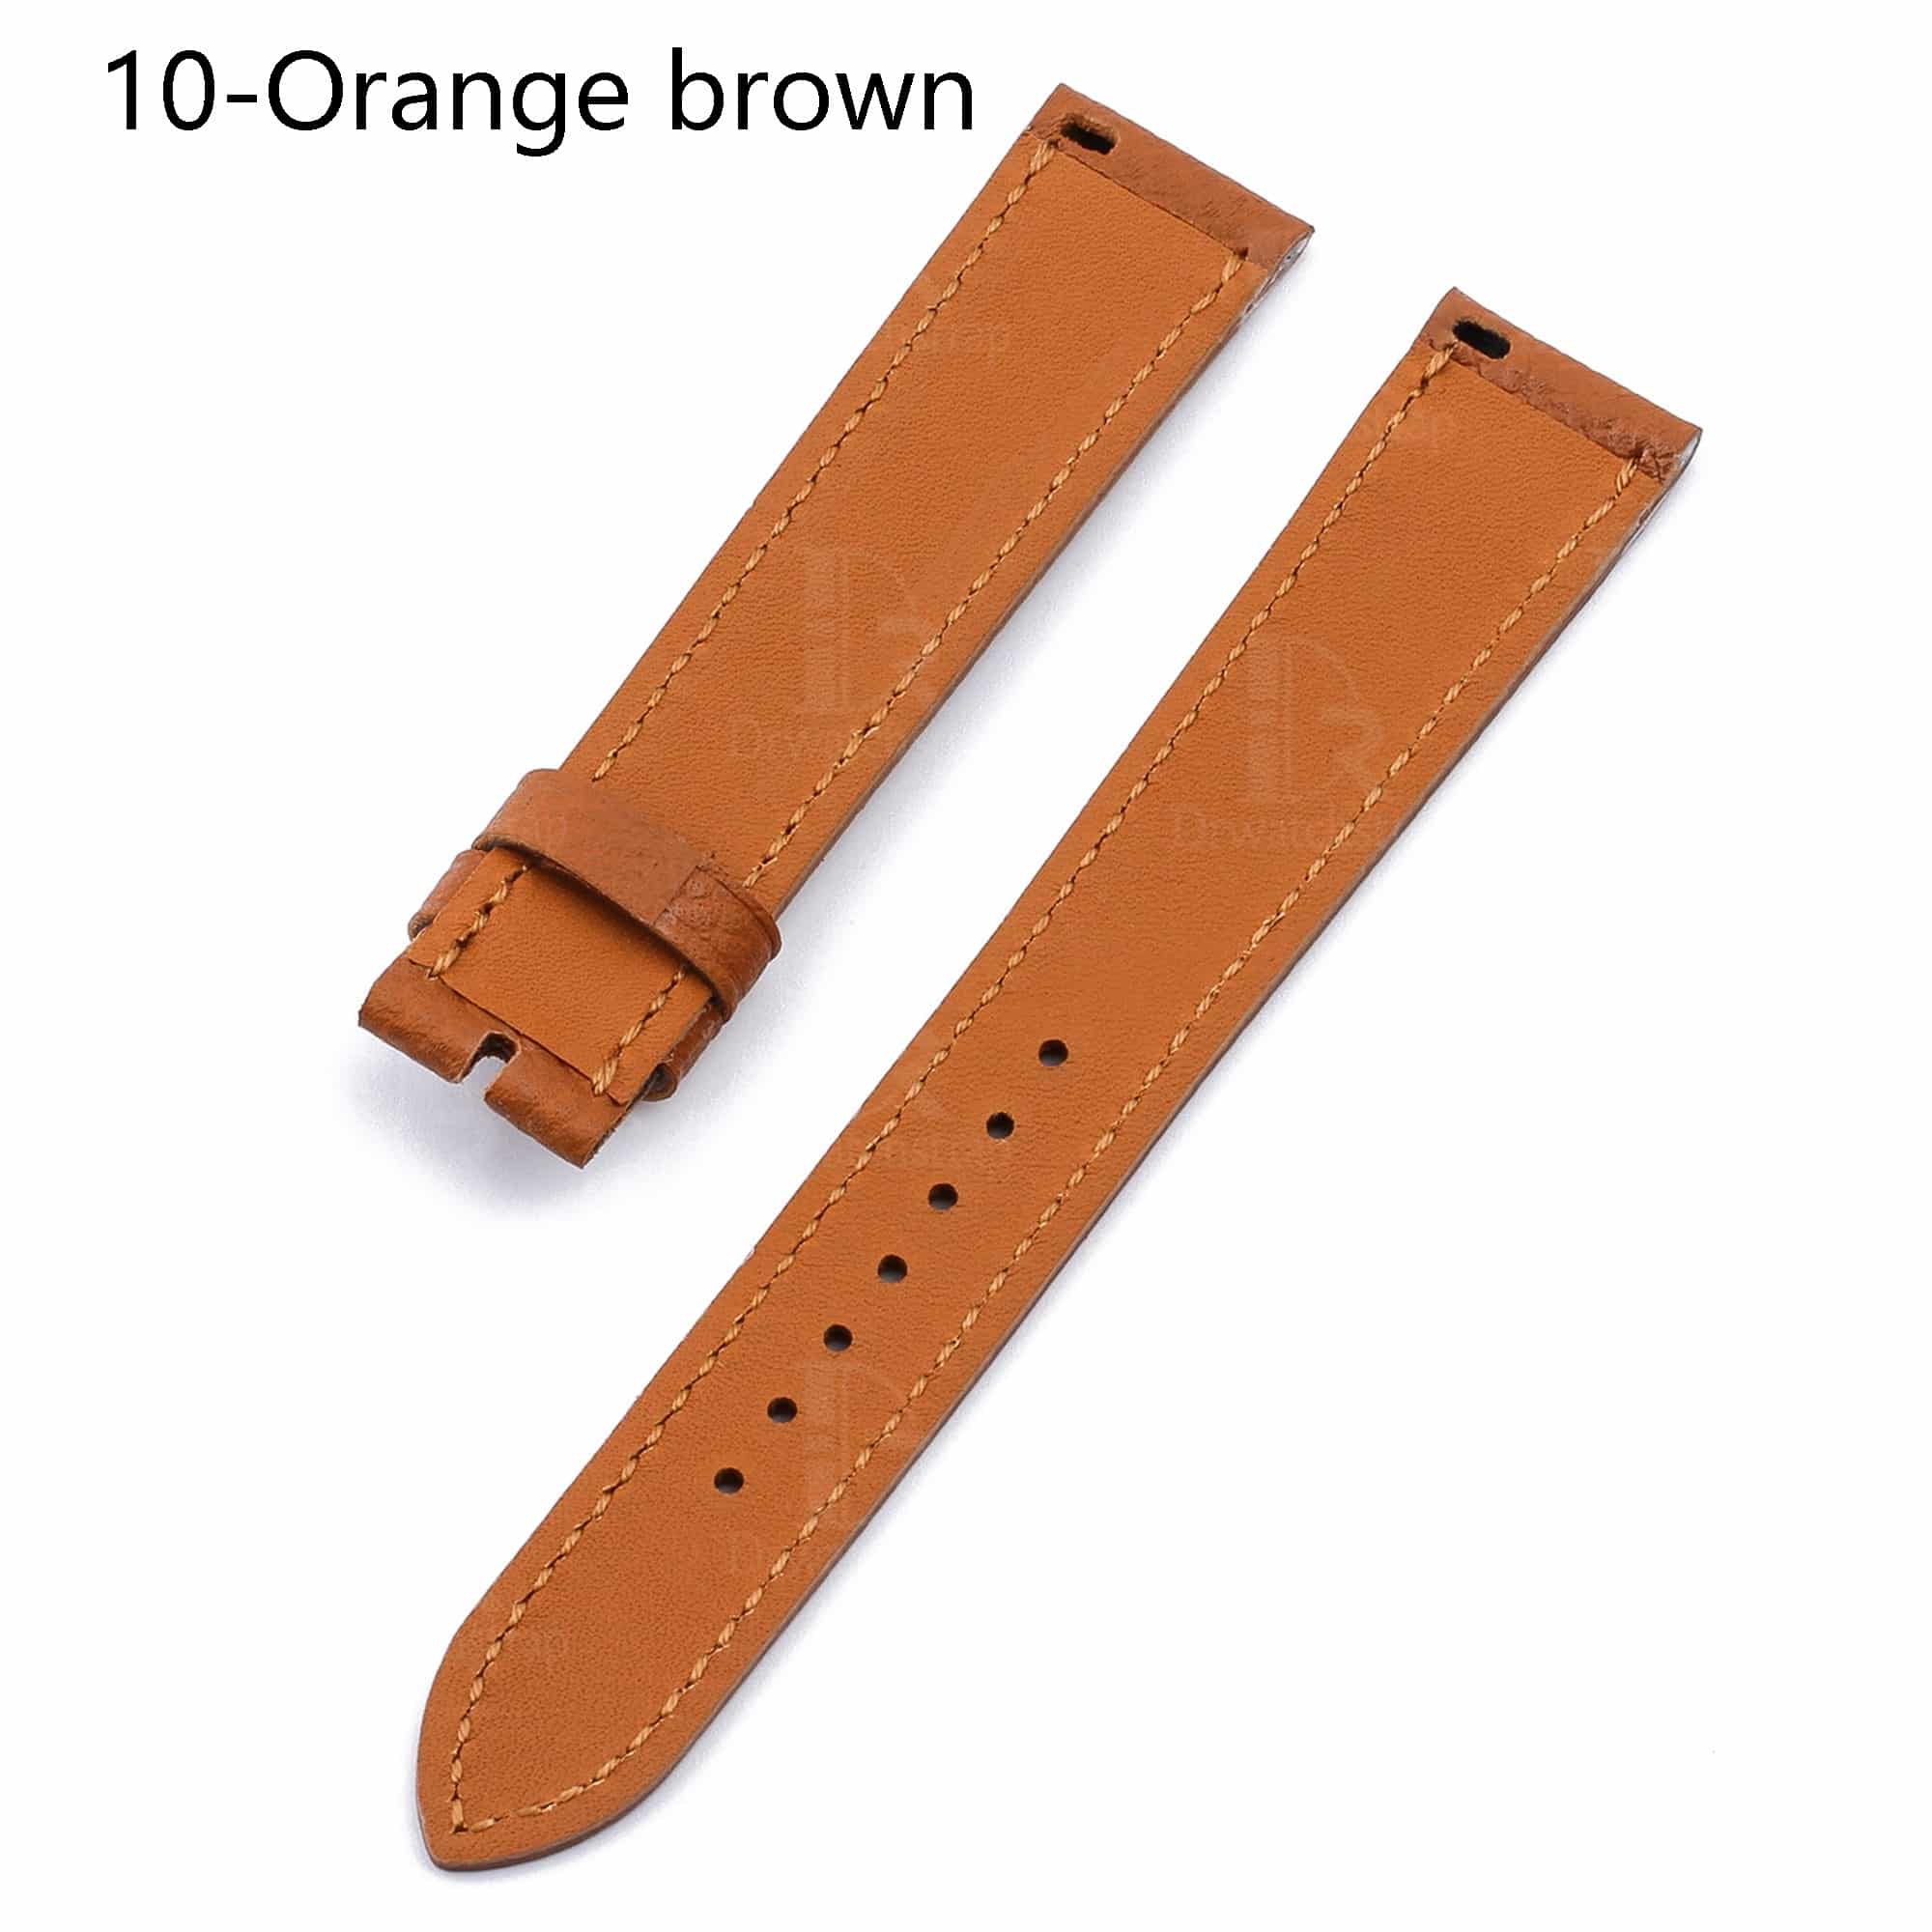 Hermes watch band Single Tour Epson Cape Cod leather strap replacement